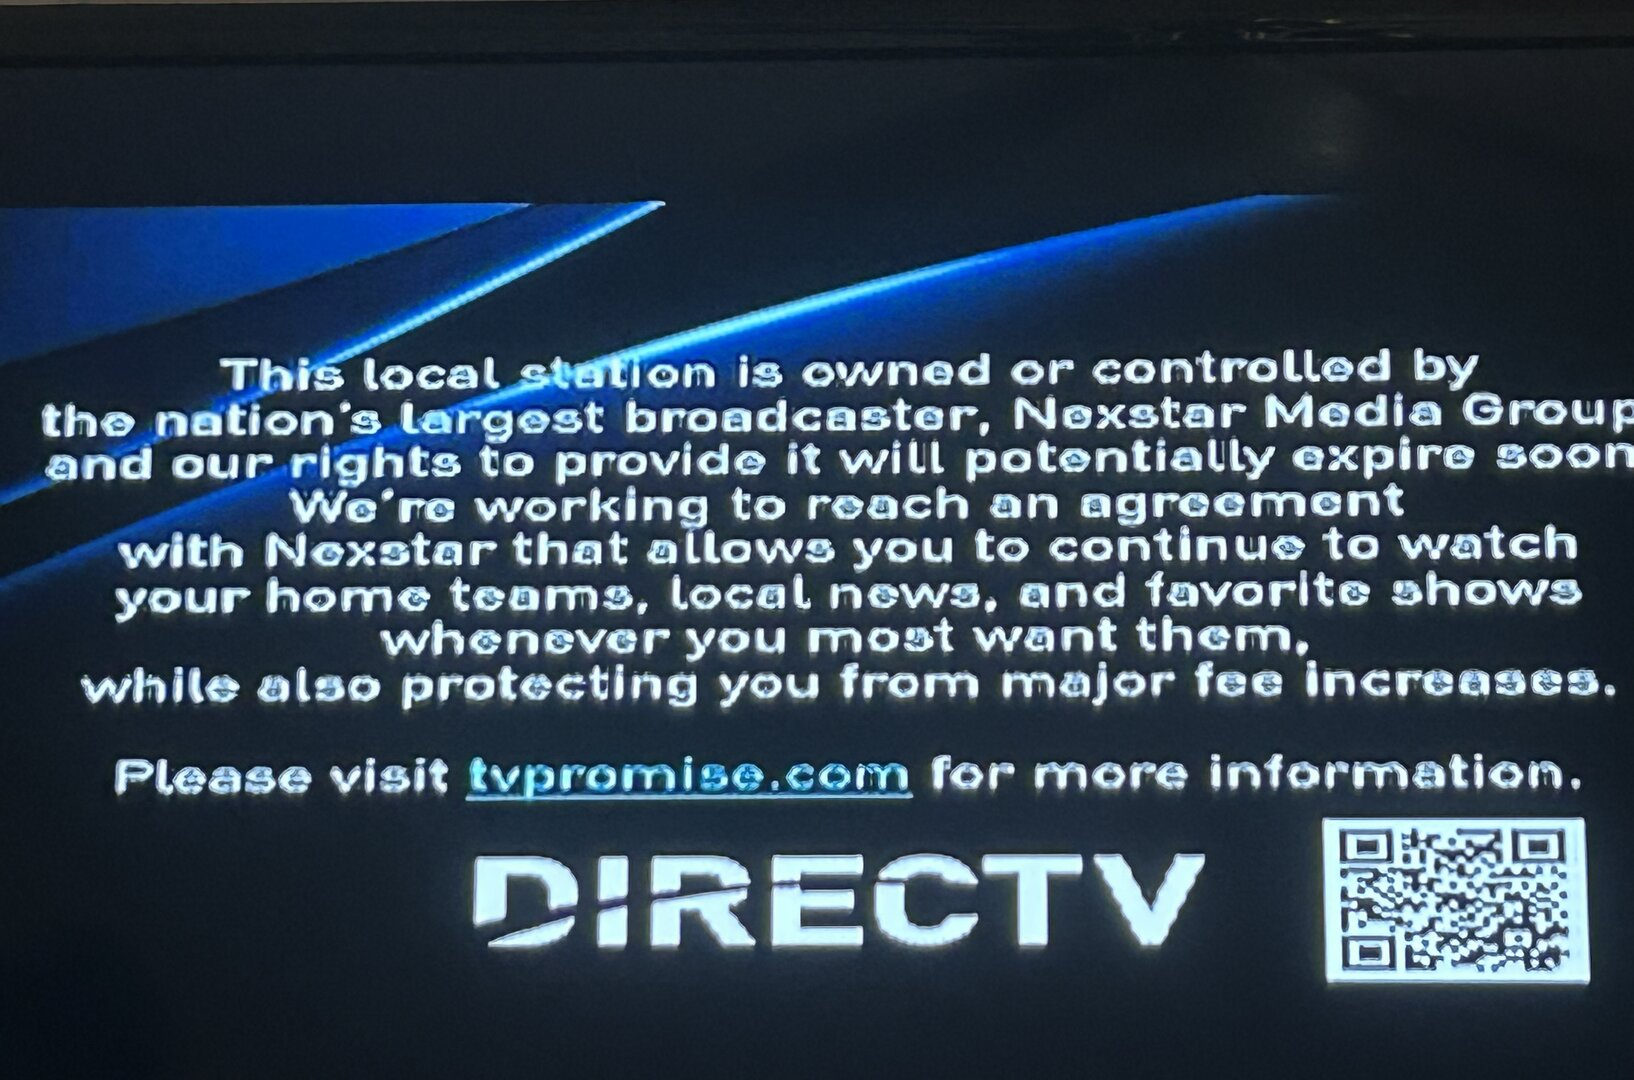 Nexstar/Mission/White Knight dispute with DIRECTV Page 4